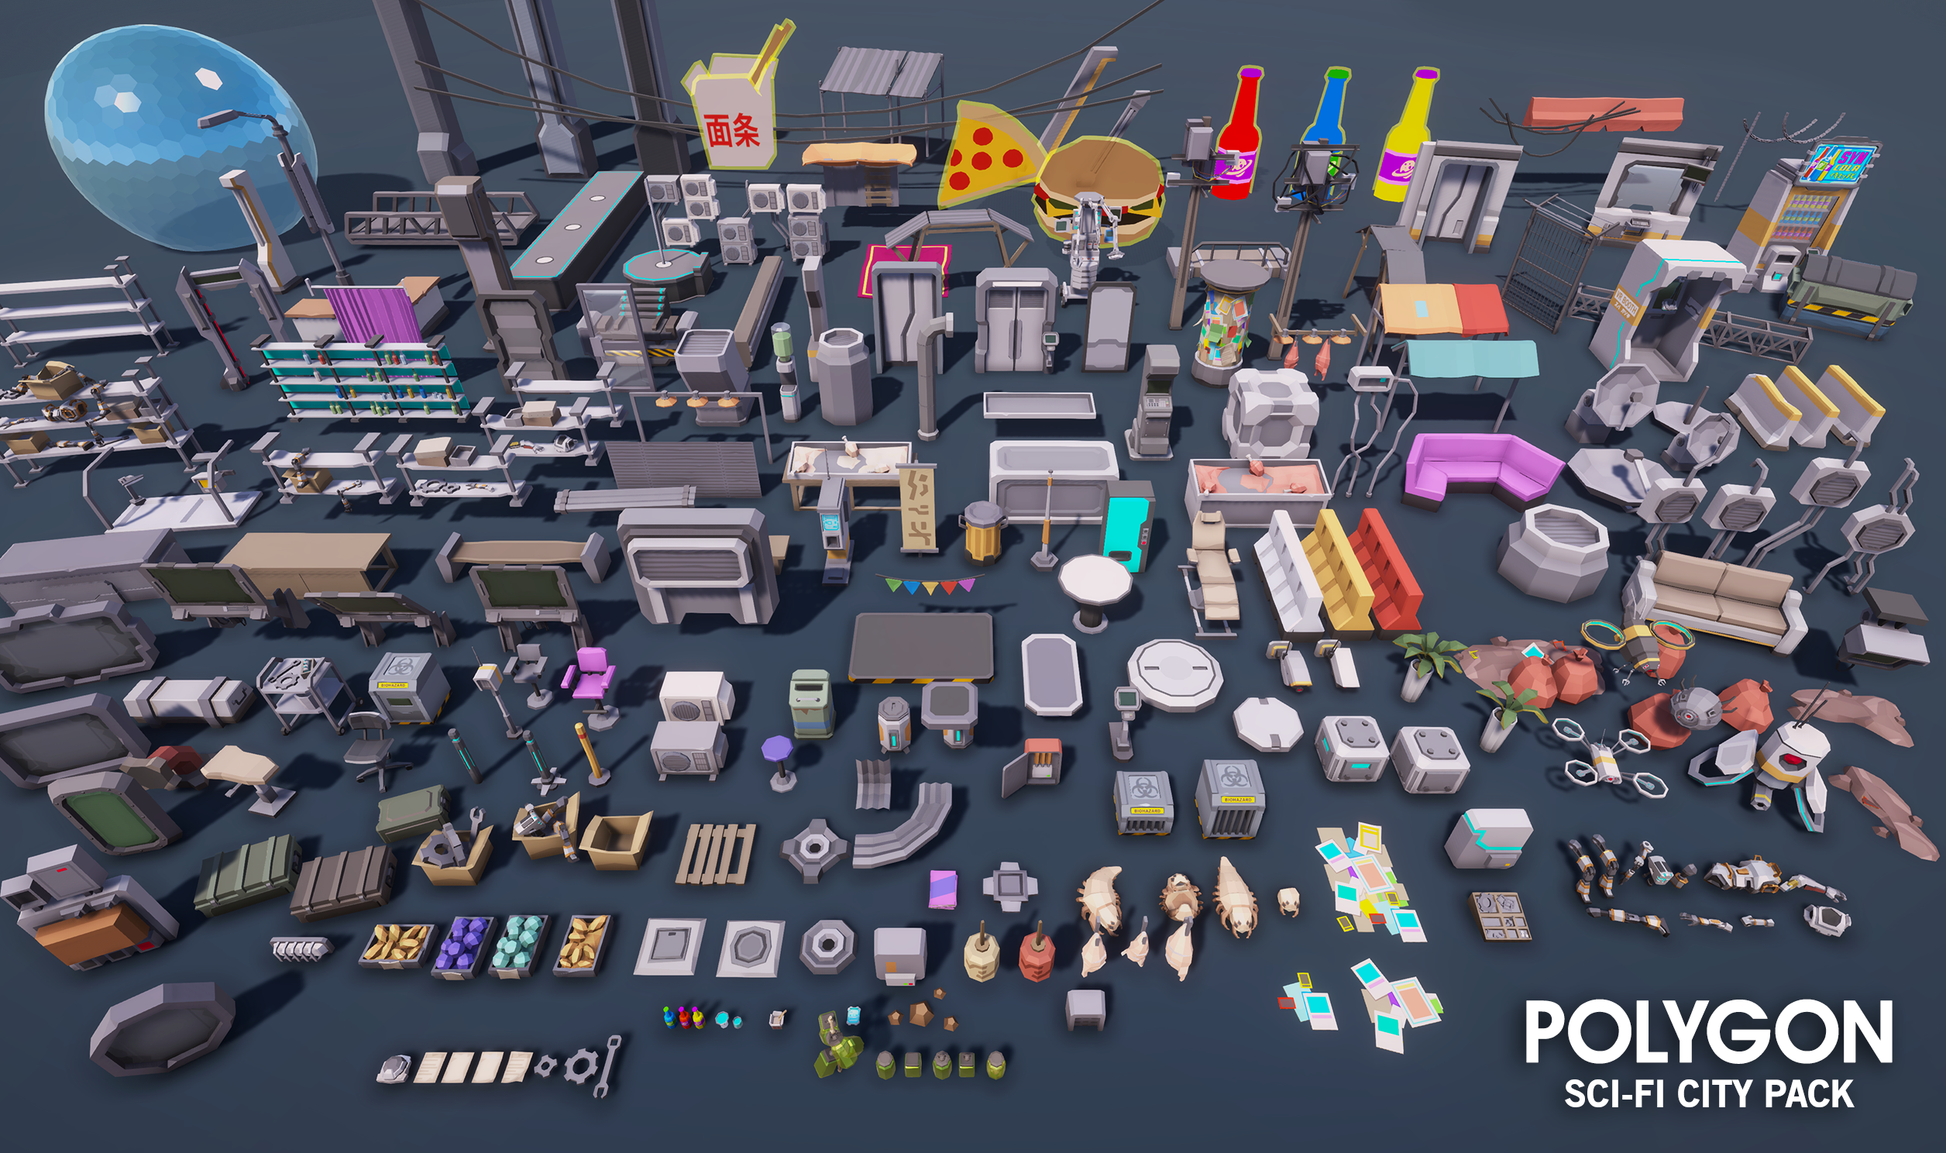 Low poly assets for populating a futuristic science fiction city